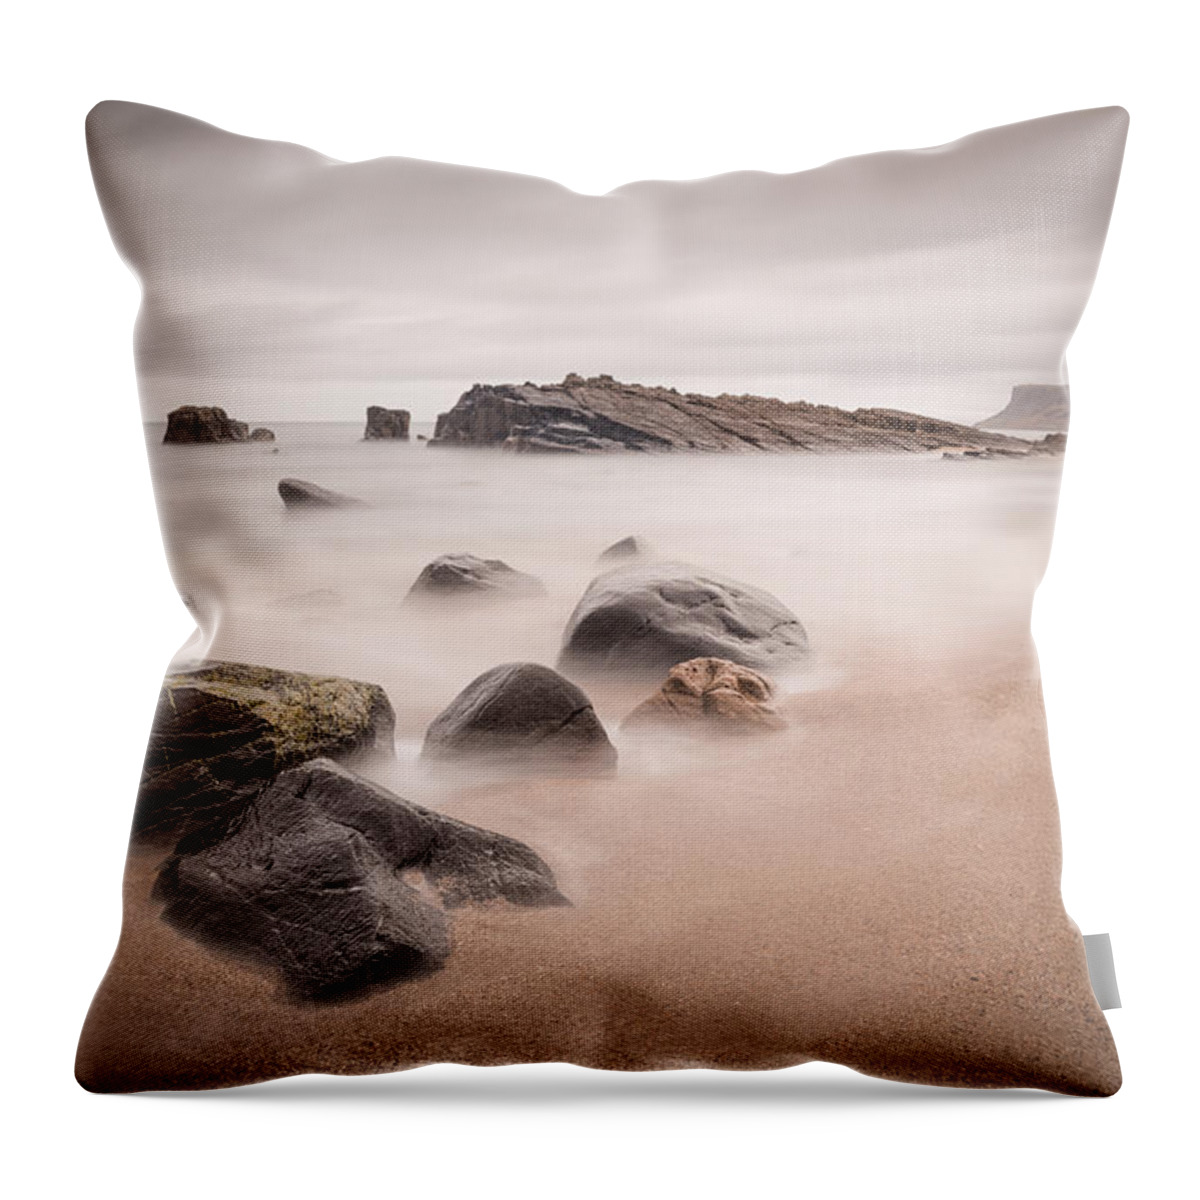 Pans Rock Throw Pillow featuring the photograph Ballycastle - Pans Rocks by Nigel R Bell